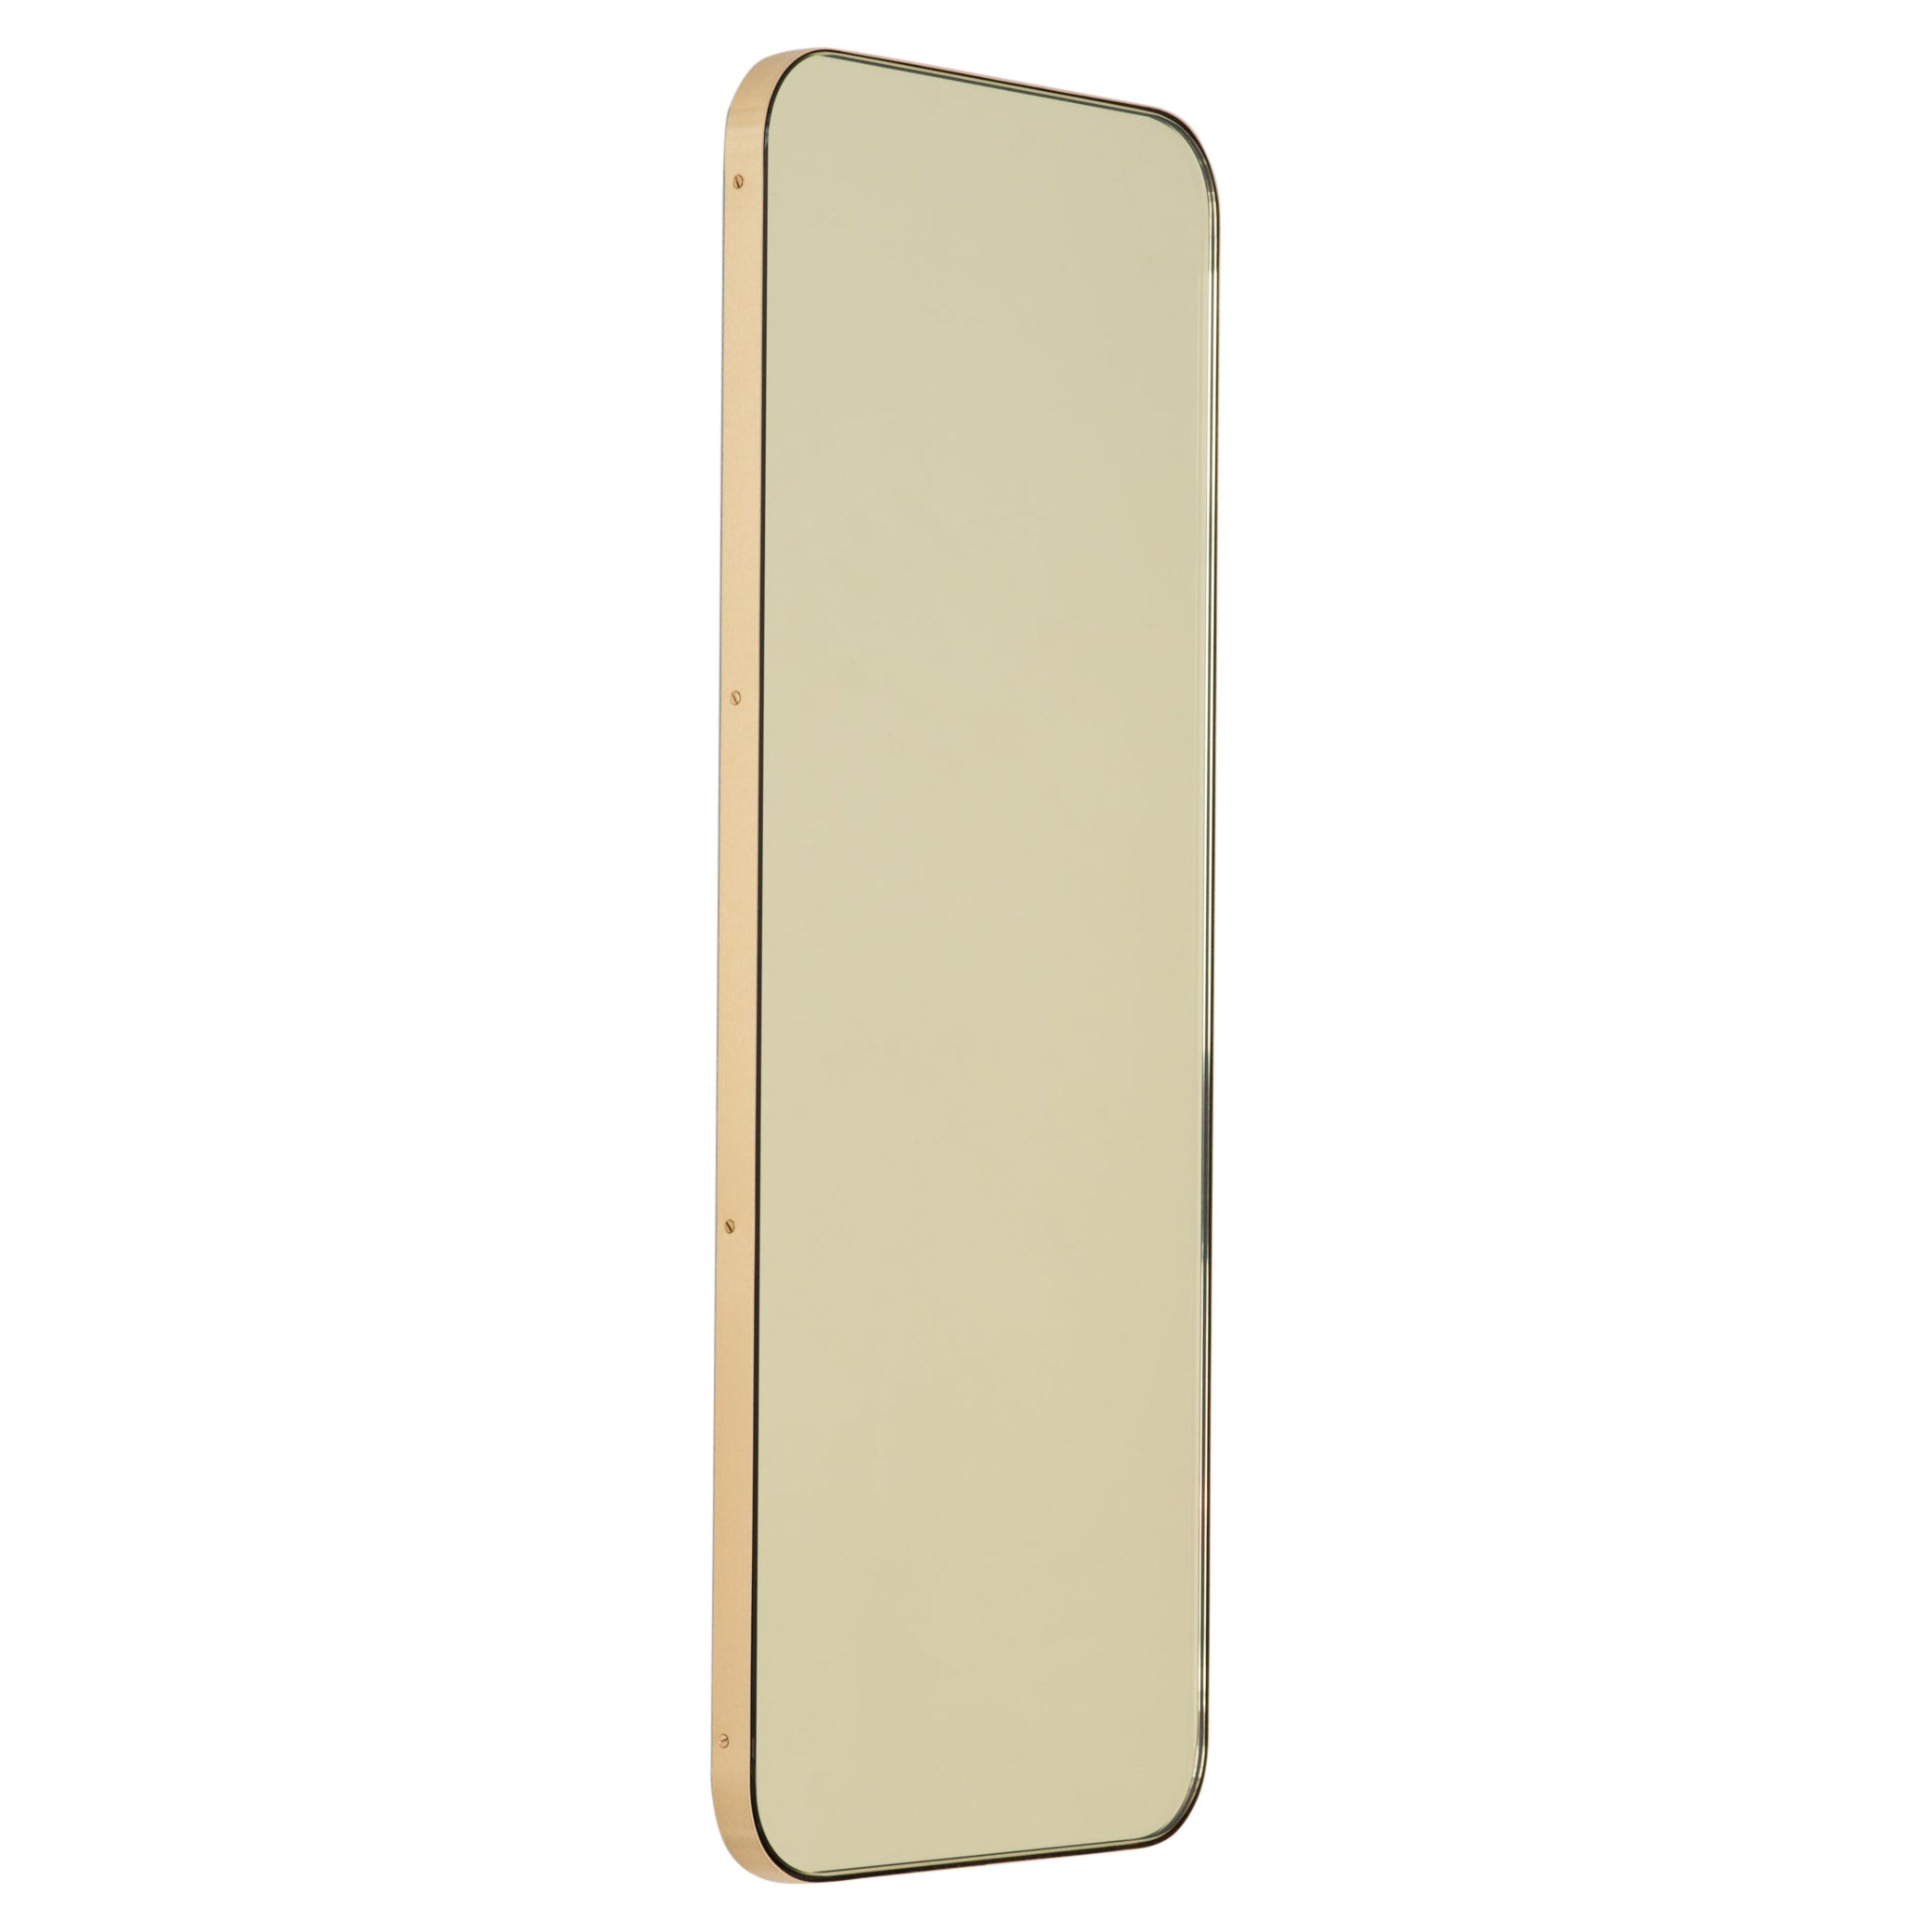 Quadris Gold Tinted Rectangular Contemporary Mirror with a Brass Frame, Small